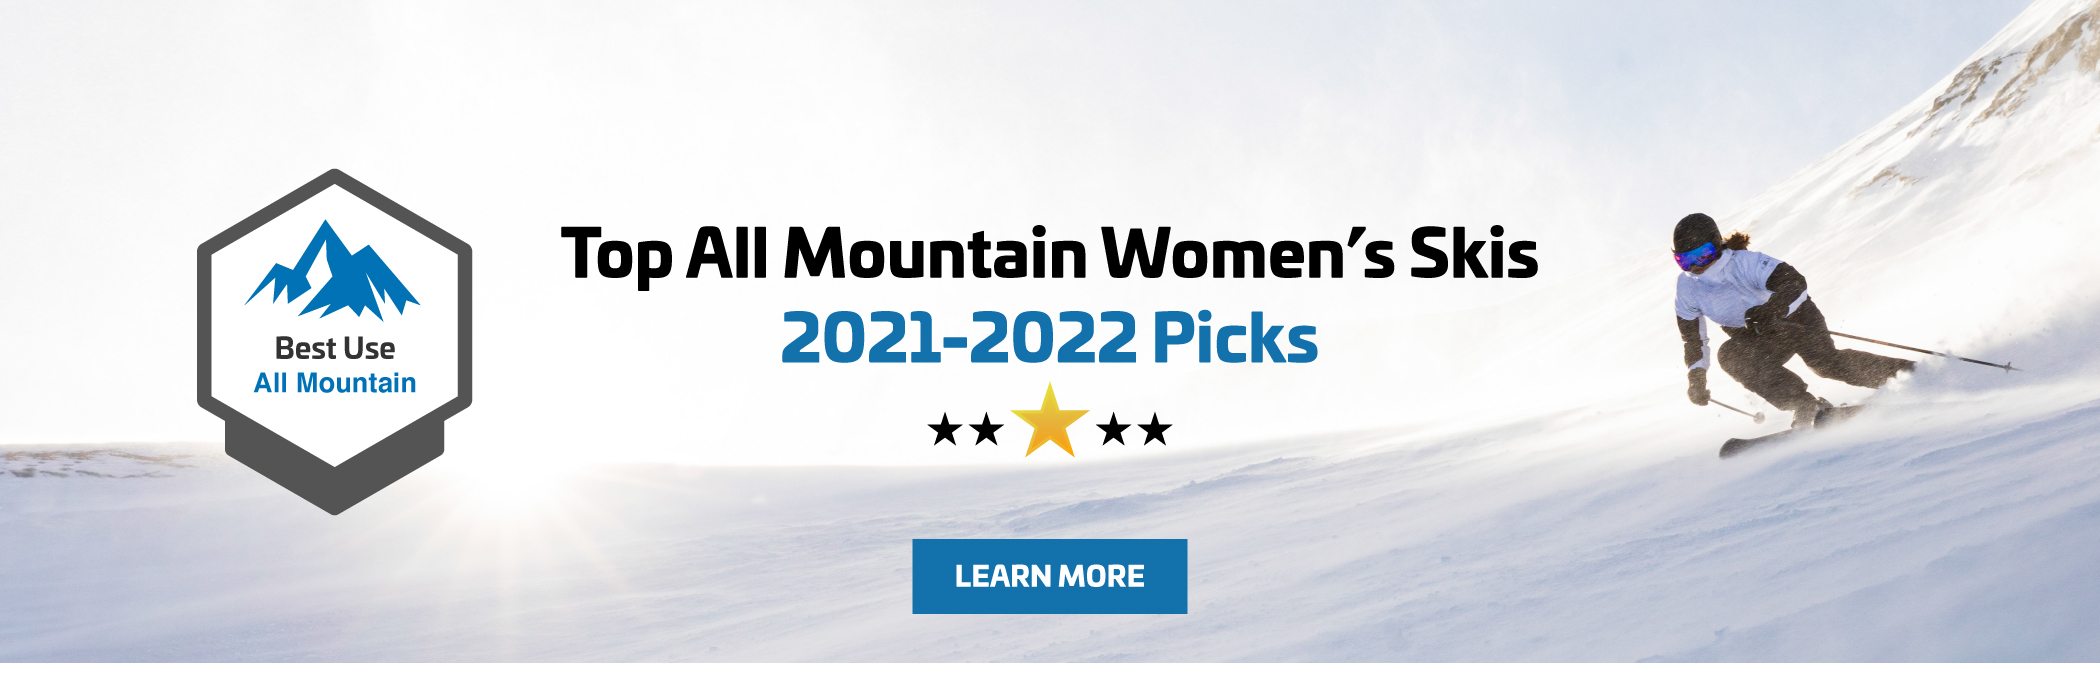 TOP ALL MOUNTAIN WOMEN'S SKIS - LEARN MORE